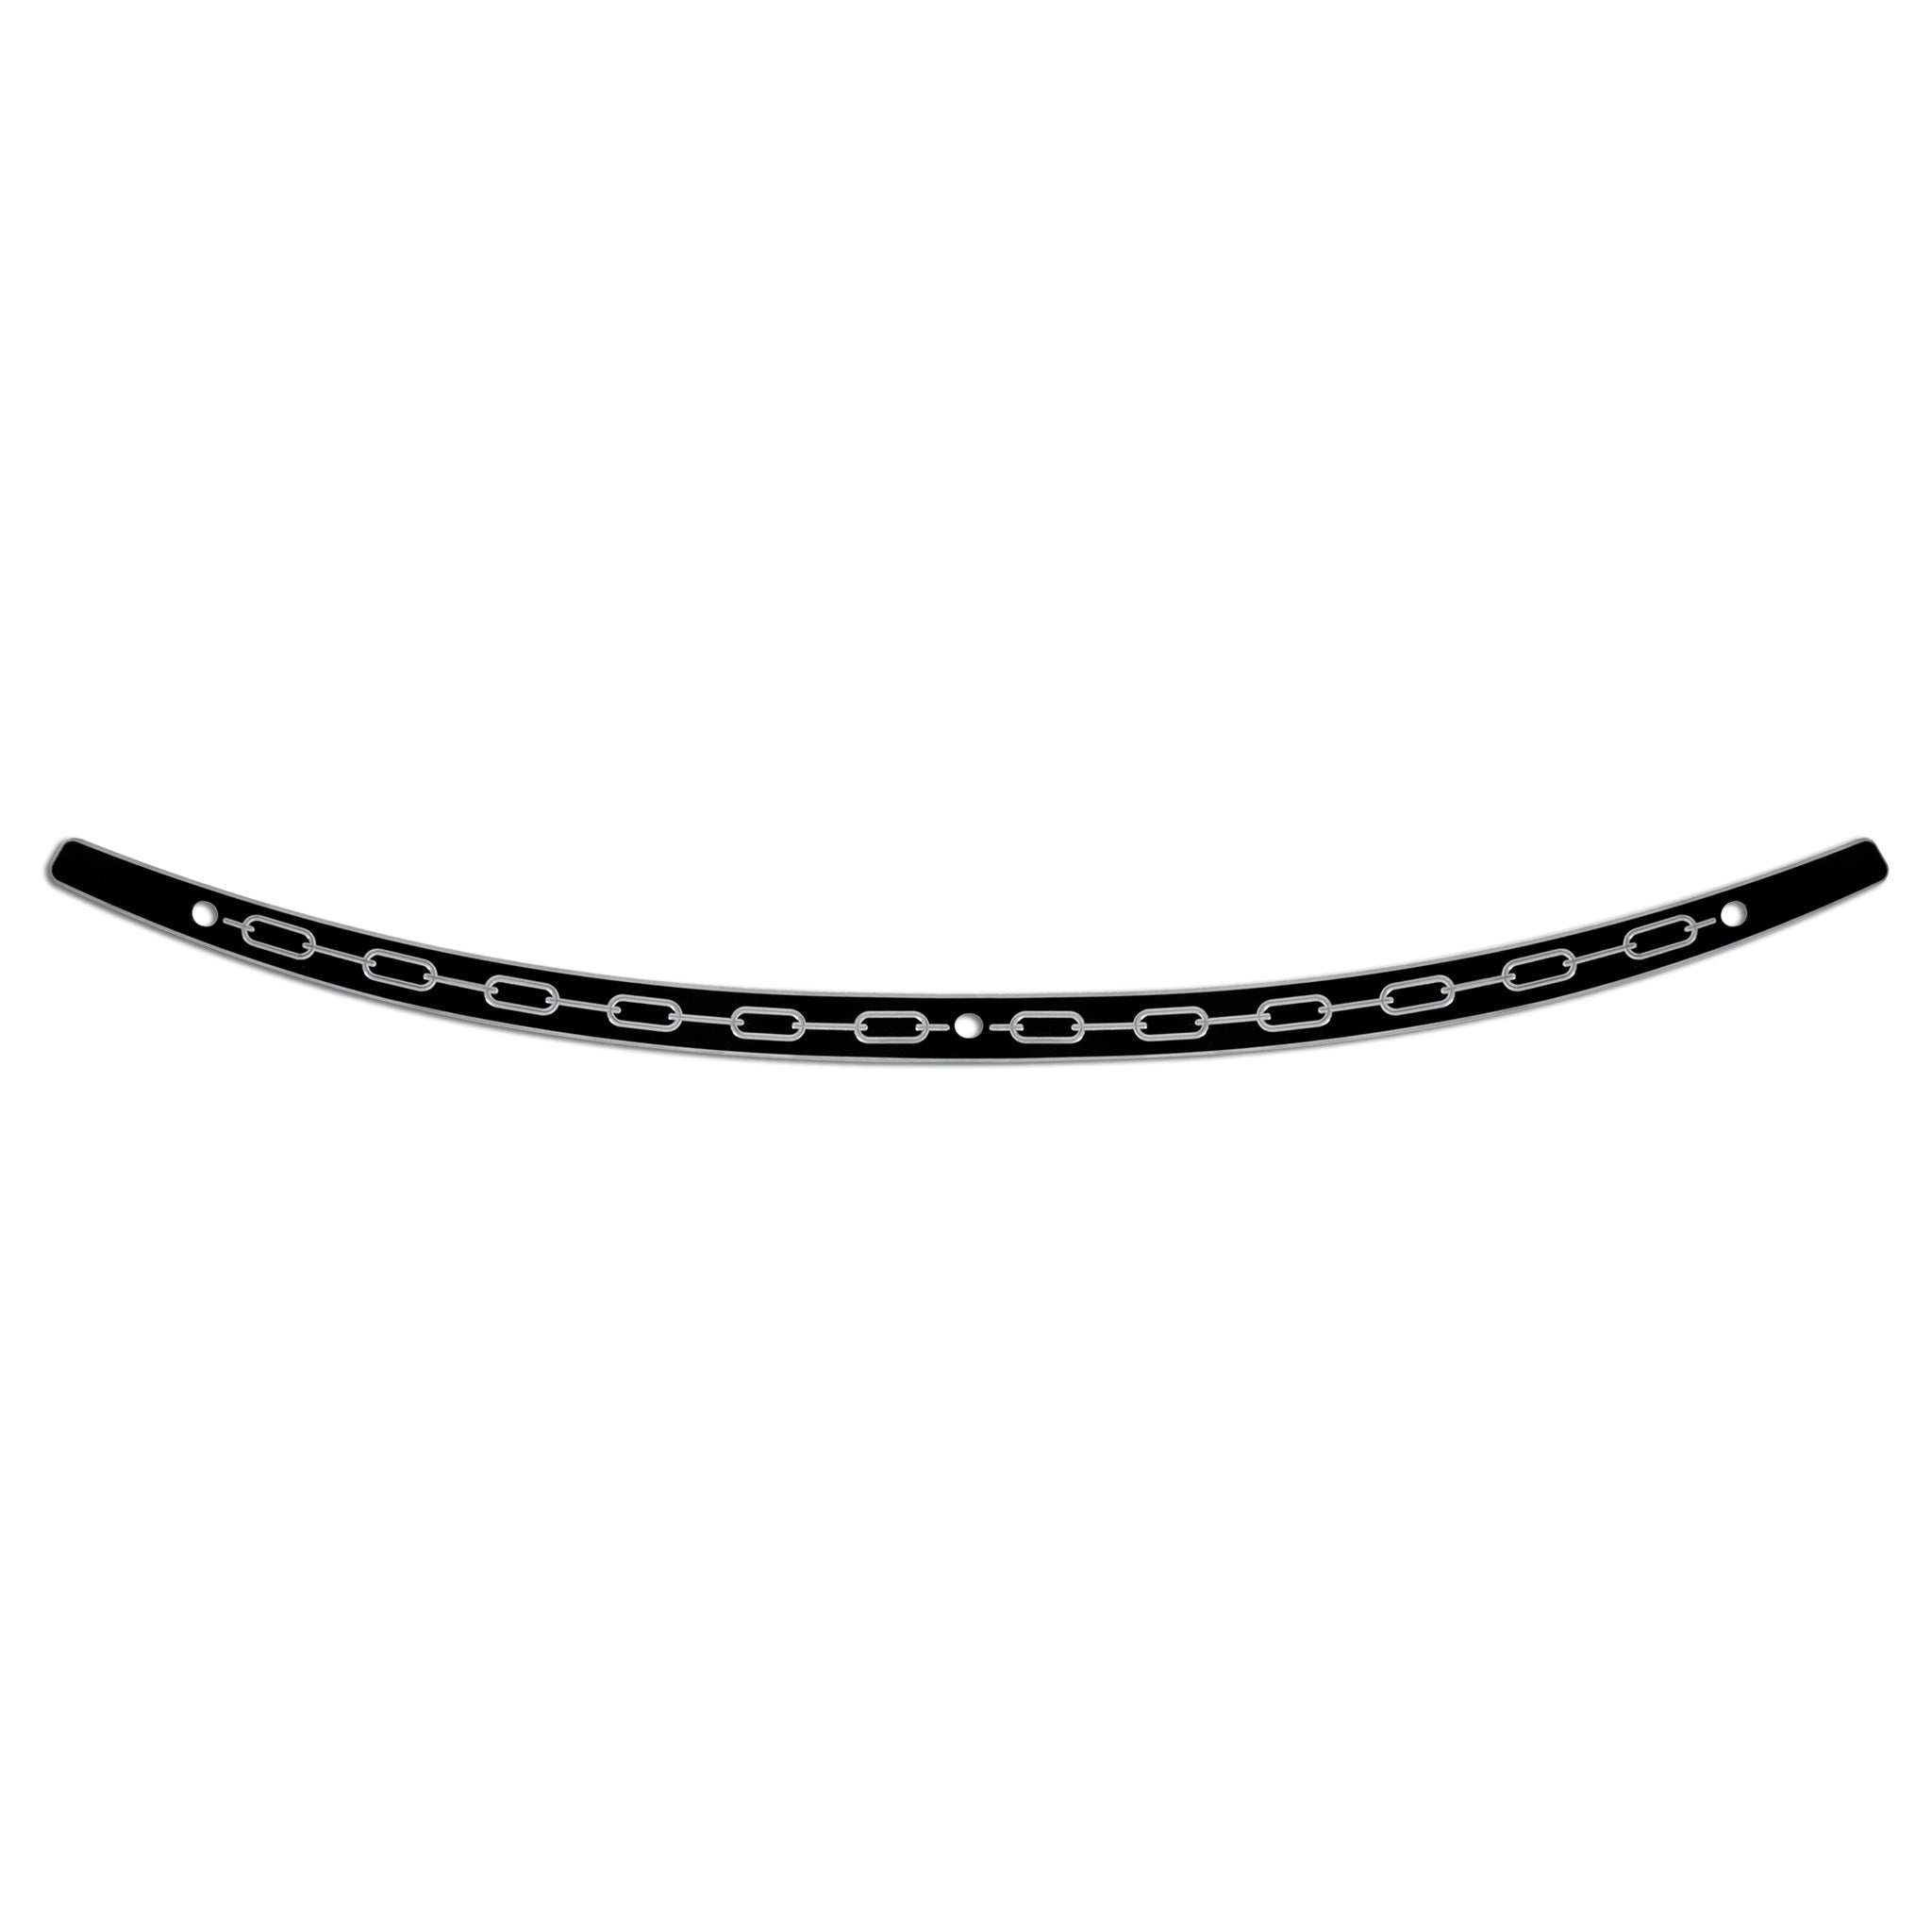 Black Contrast Fairing Windshield Trim for 2014 and Up FLH